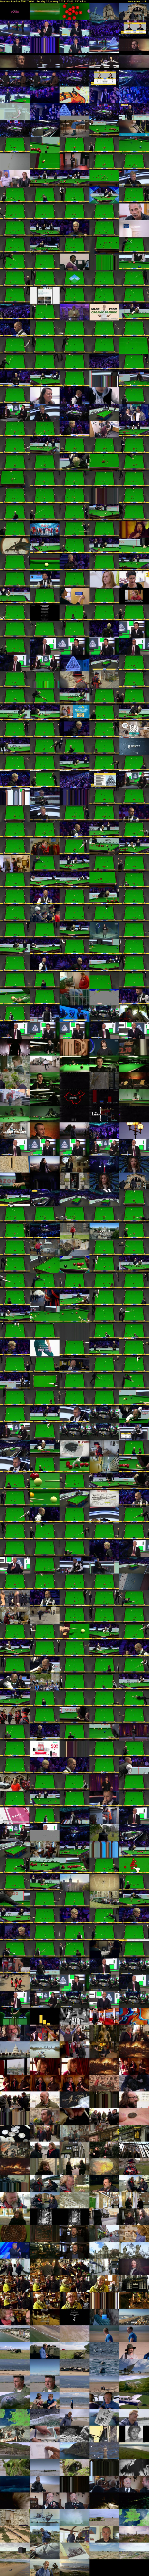 Masters Snooker (BBC TWO) Sunday 16 January 2022 13:00 - 17:15